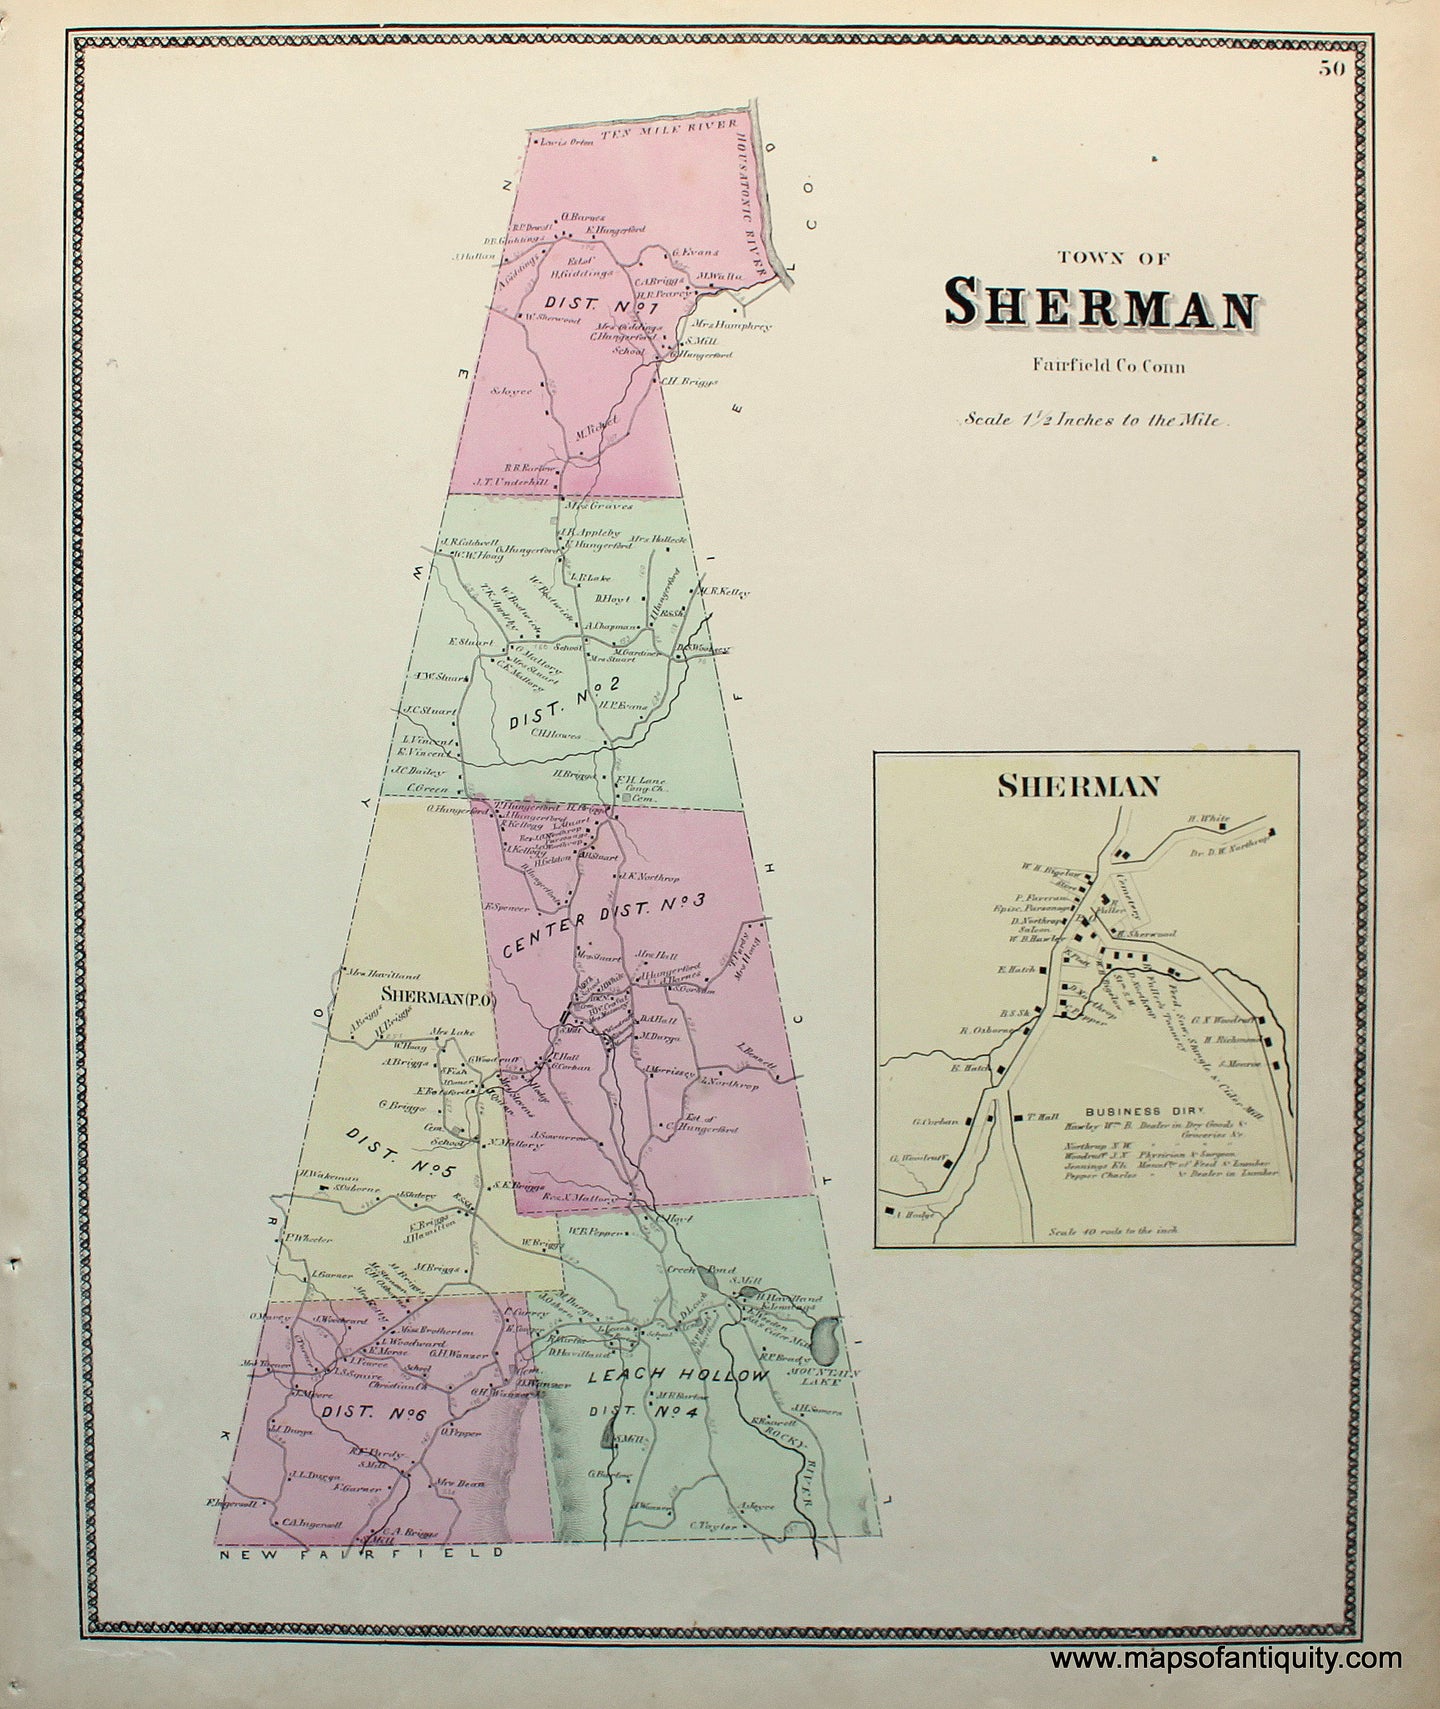 Antique-Hand-Colored-Map-Town-of-Sherman-(CT)-United-States-Northeast-1867-Baker-&-Tilden-Maps-Of-Antiquity